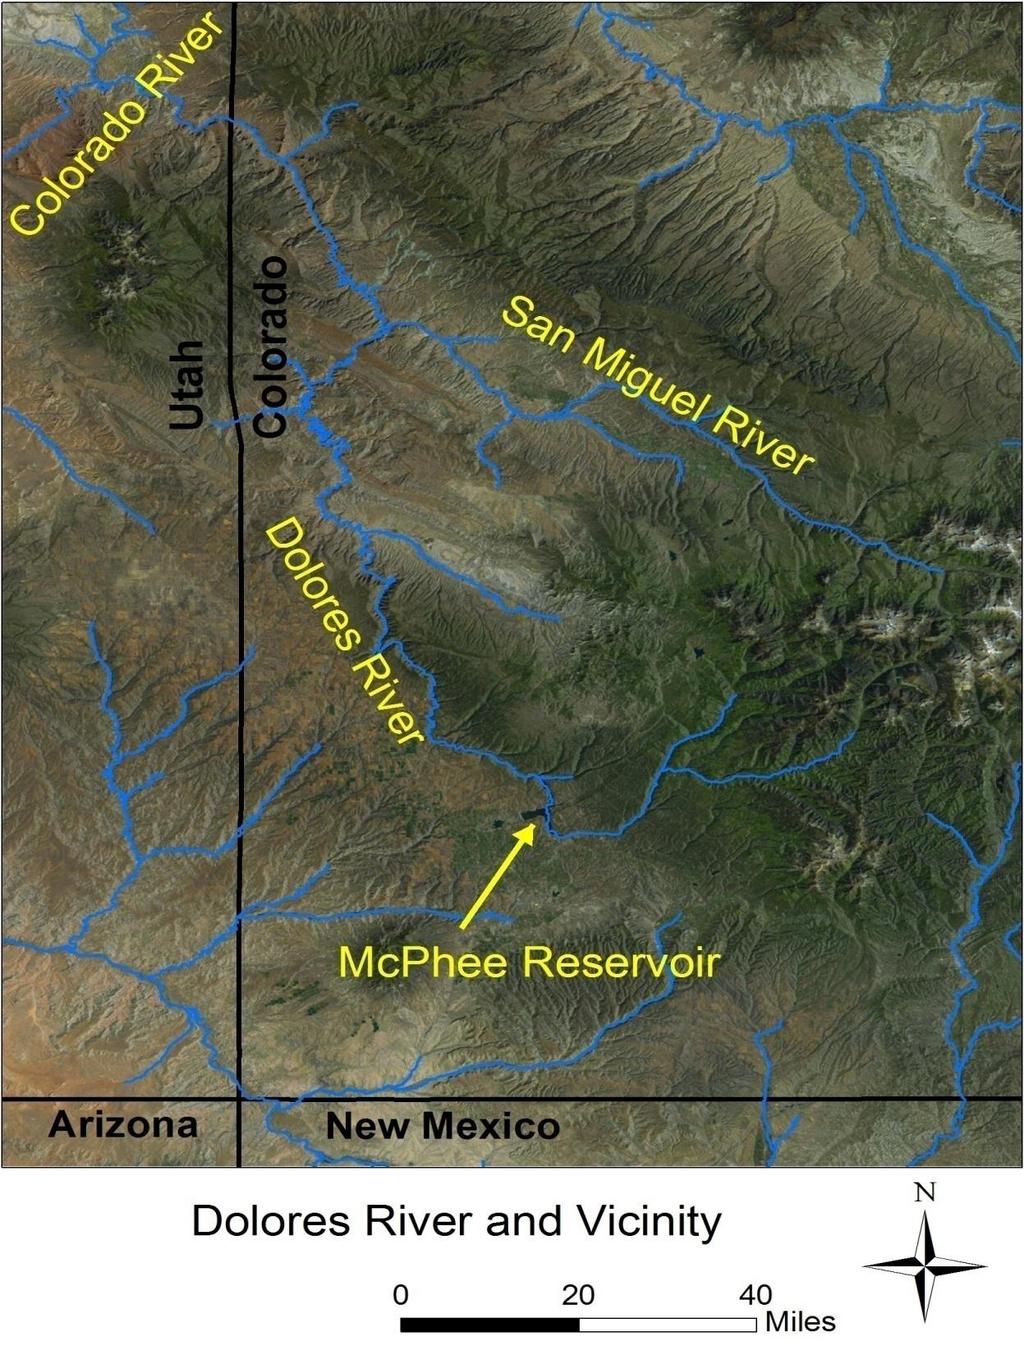 Project Area From McPhee Reservoir to the confluence with the Colorado